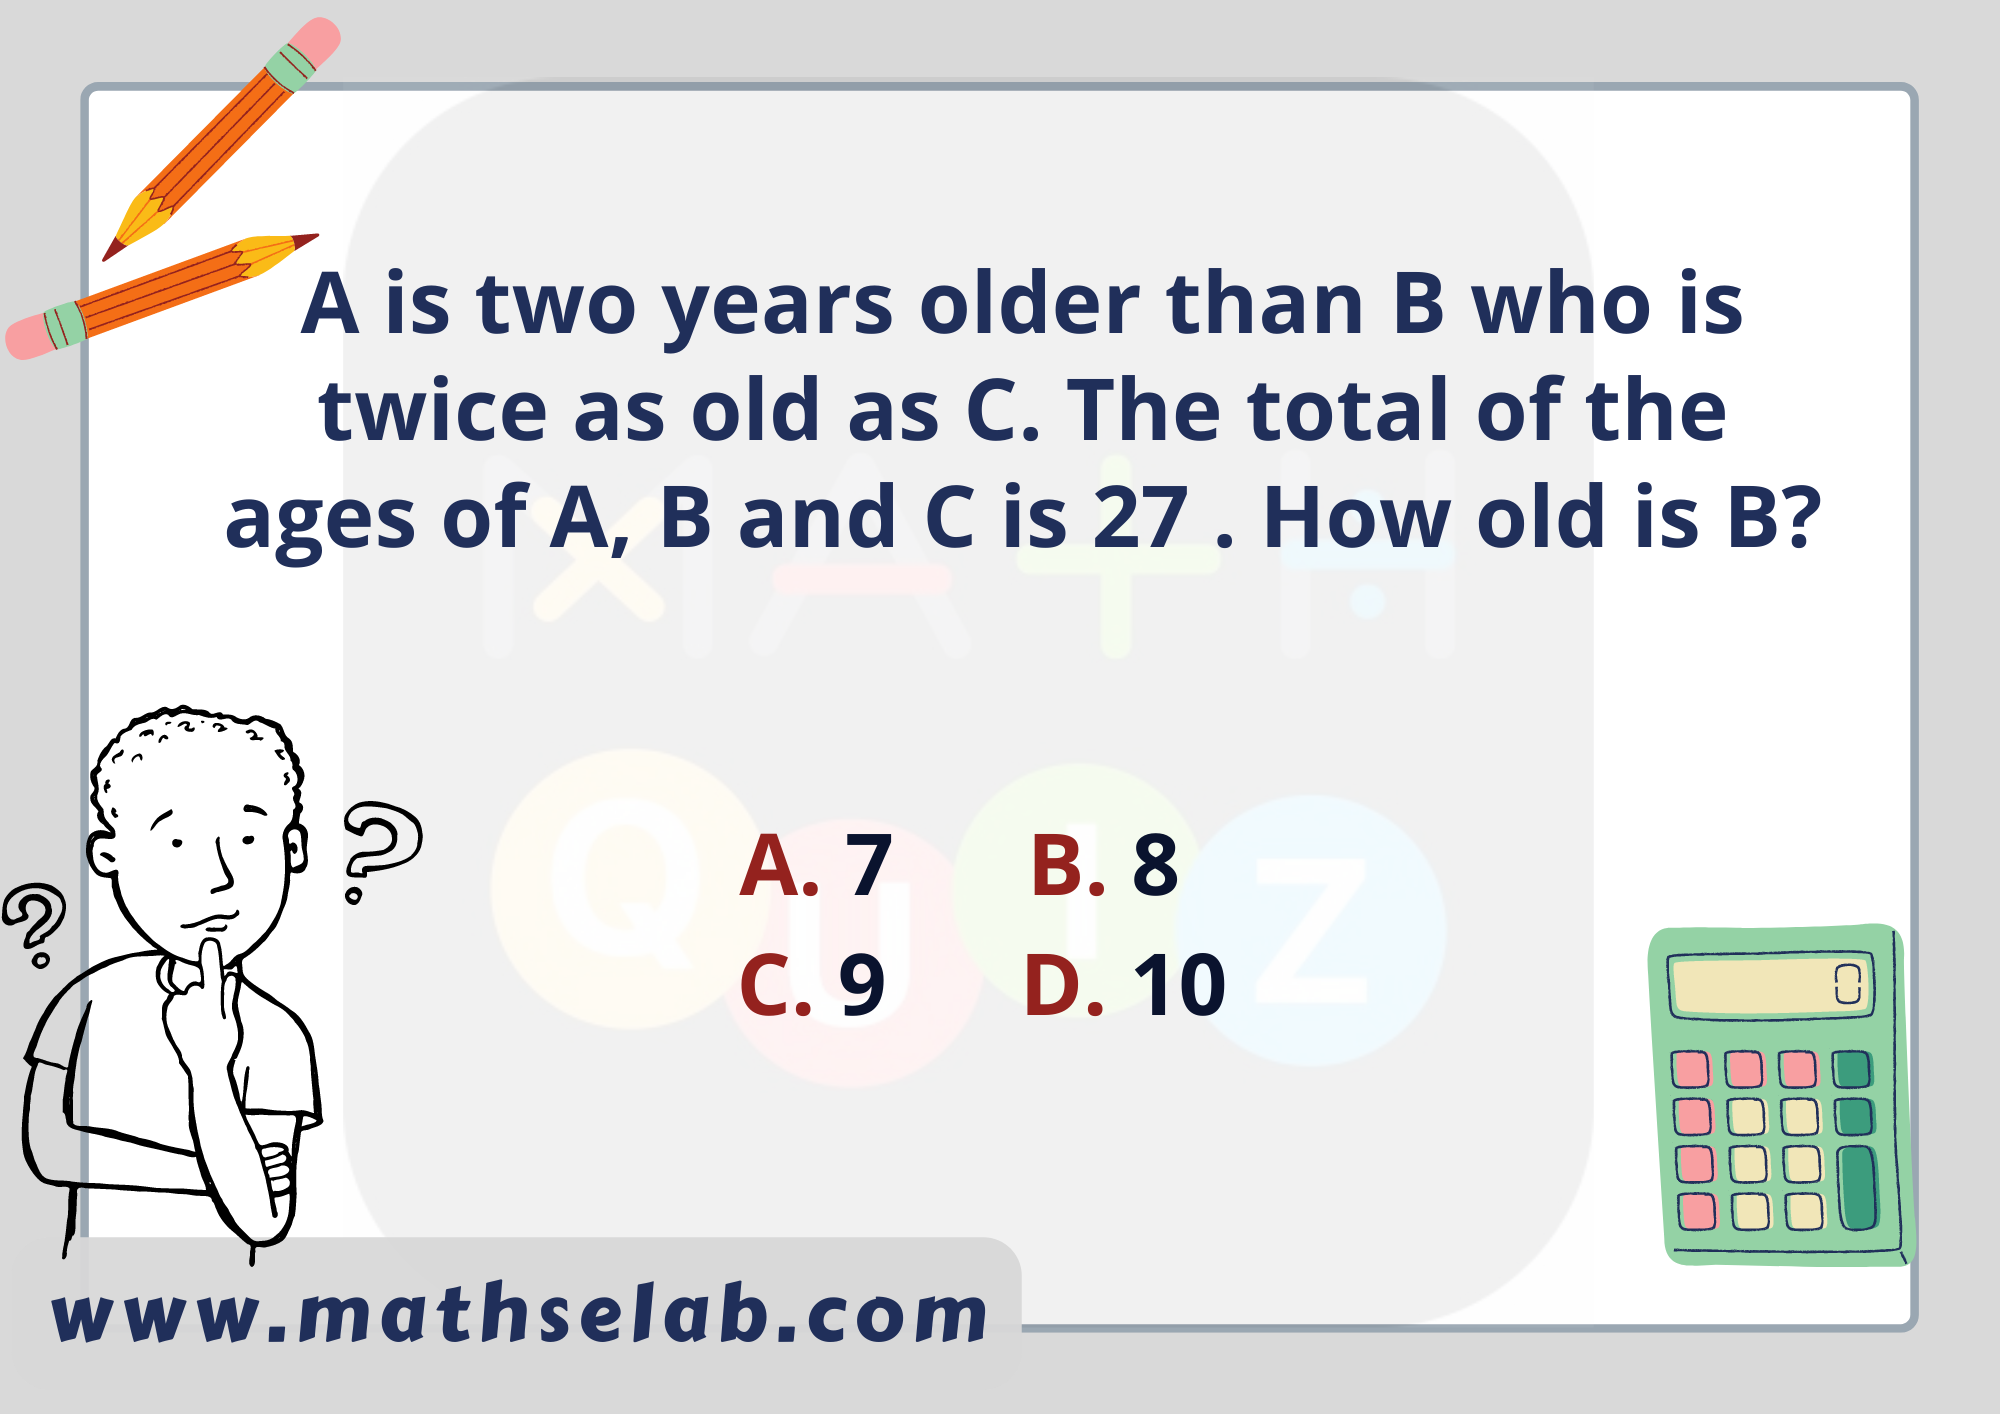 A is two years older than B who is twice as old as C. The total of the ages of A, B and C is 27 . How old is B?